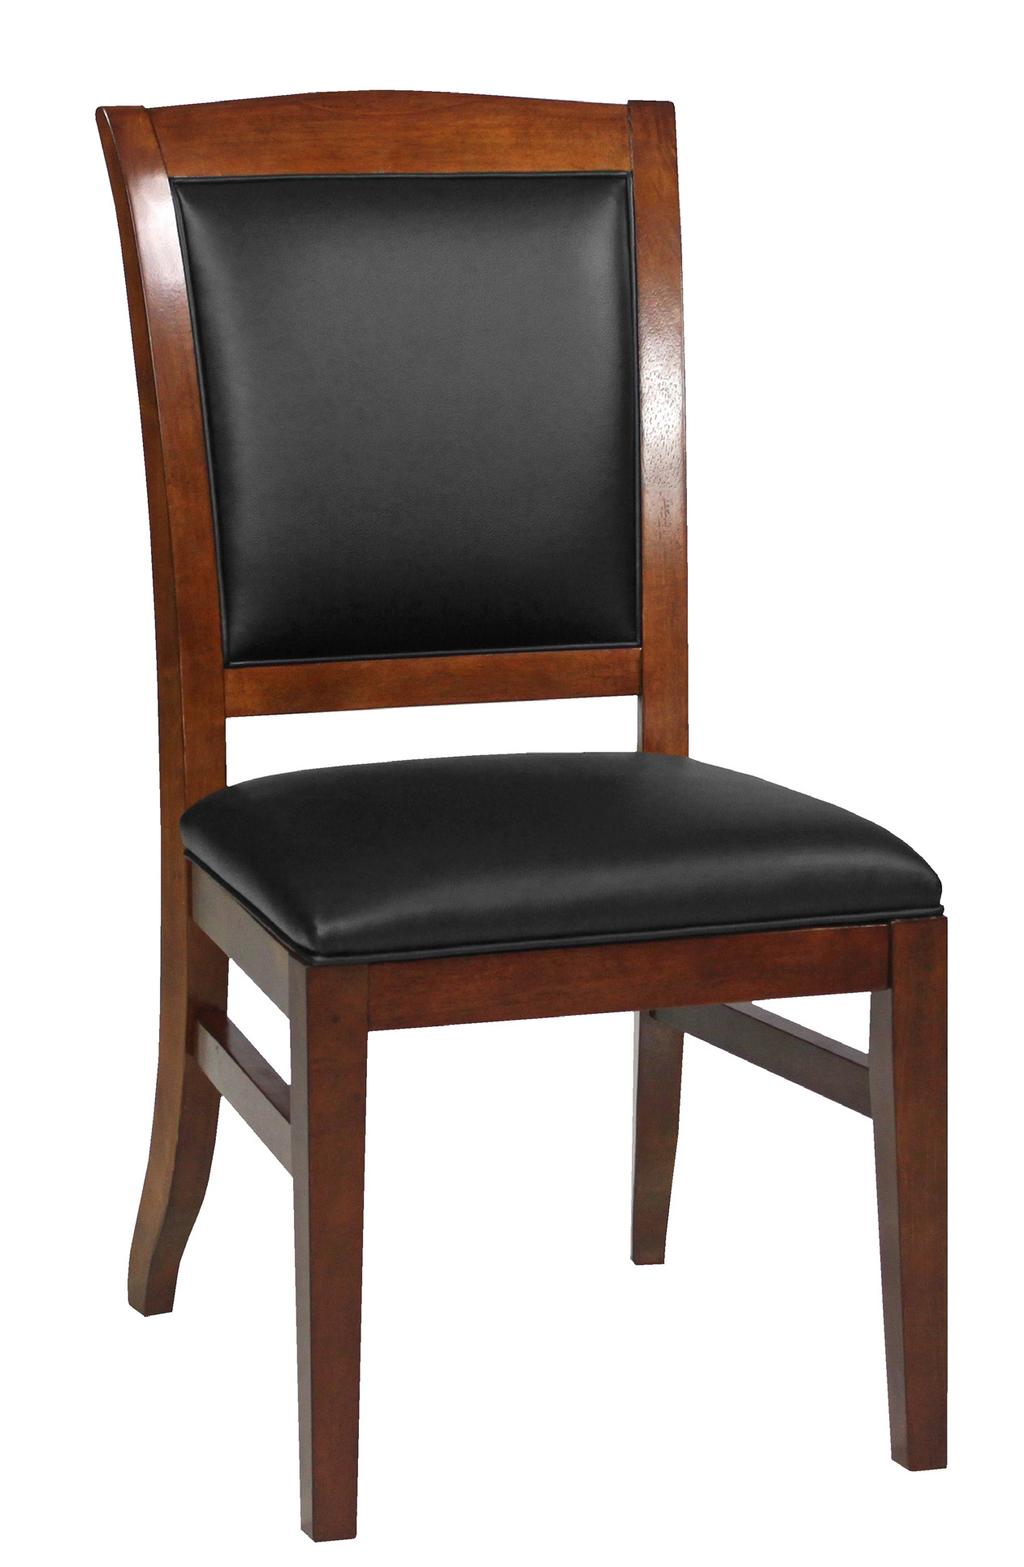 DINING/GAME CHAIR Perfect for game